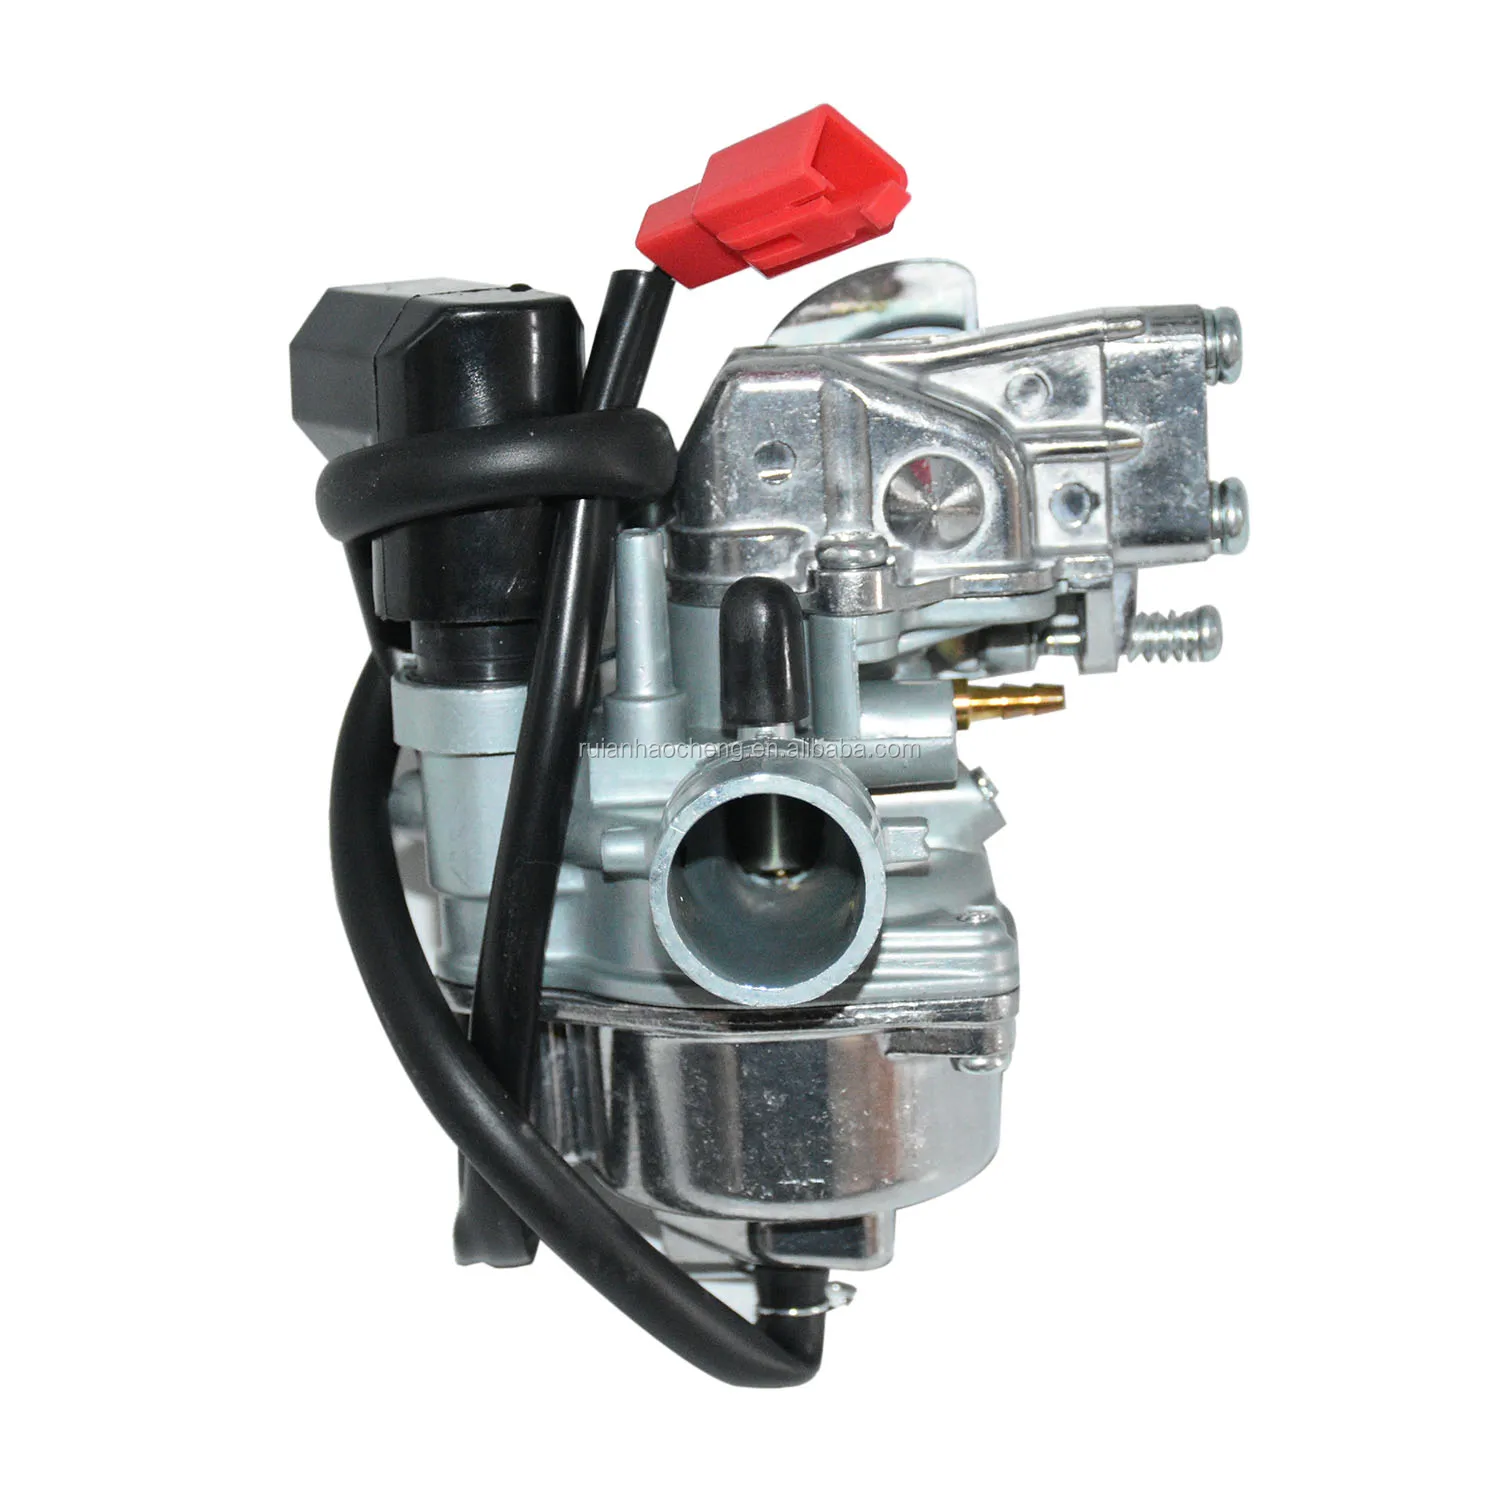 Carburetor for Yamaha Zuma YW50 Scooter Moped Carb 2011-2002 2003 2004 2005 2006 